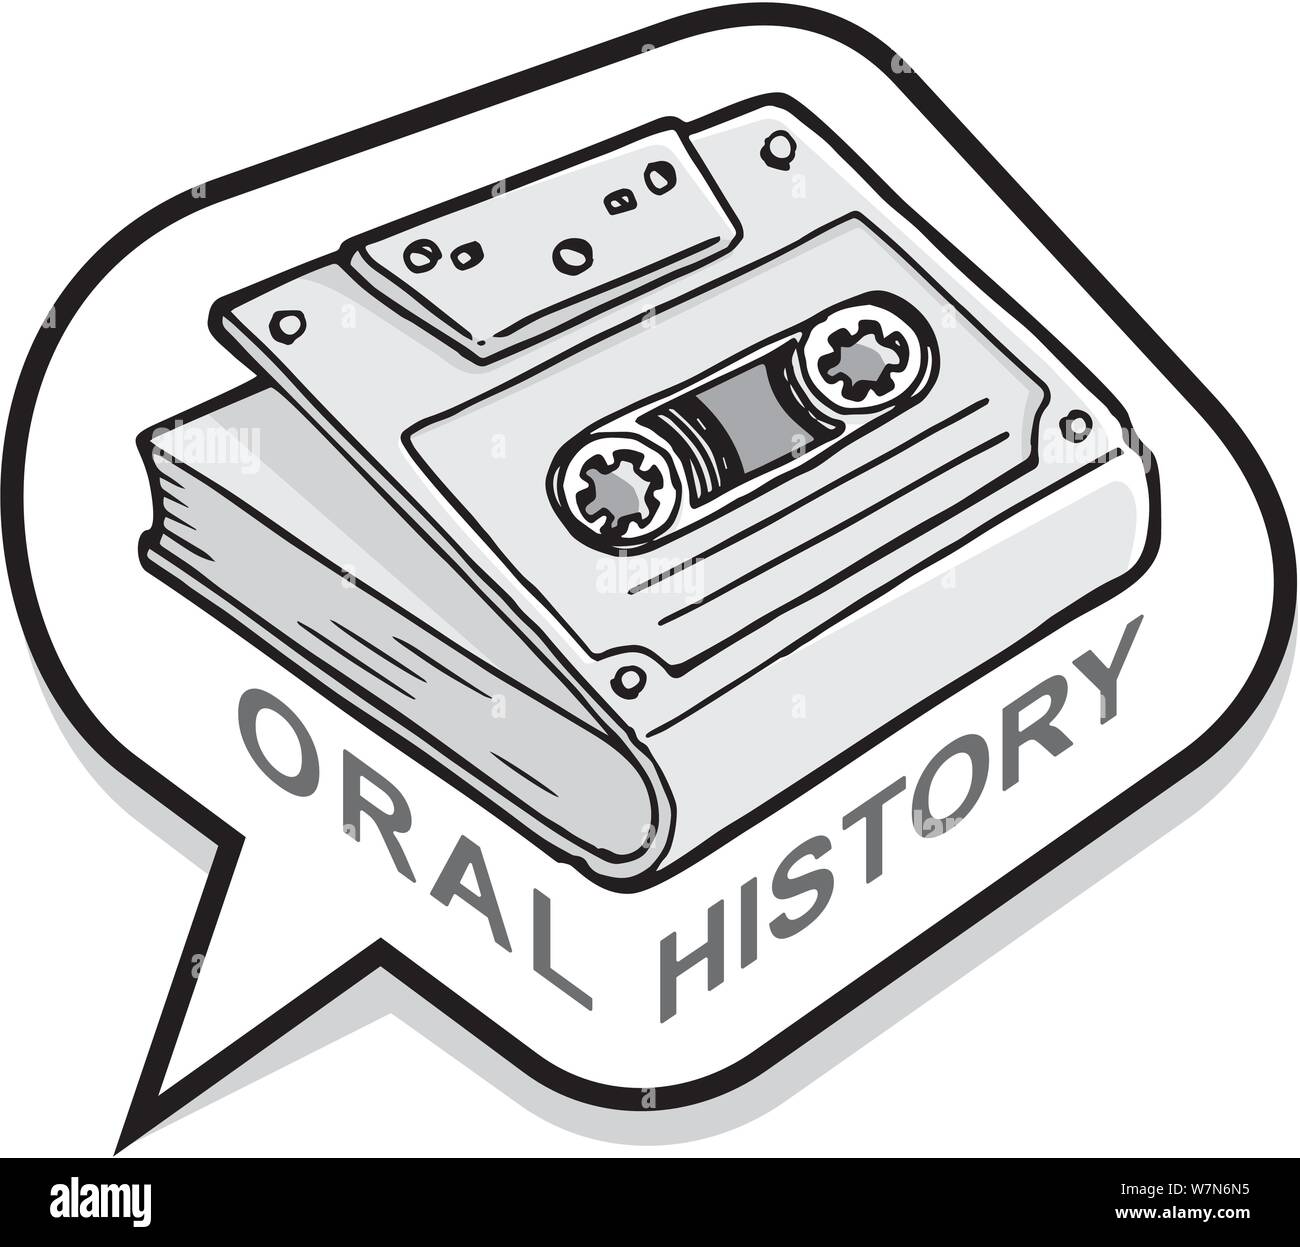 A book with audio cassette cover inside a speech bubble and text below. Use it for oral history group presentations. Stock Vector